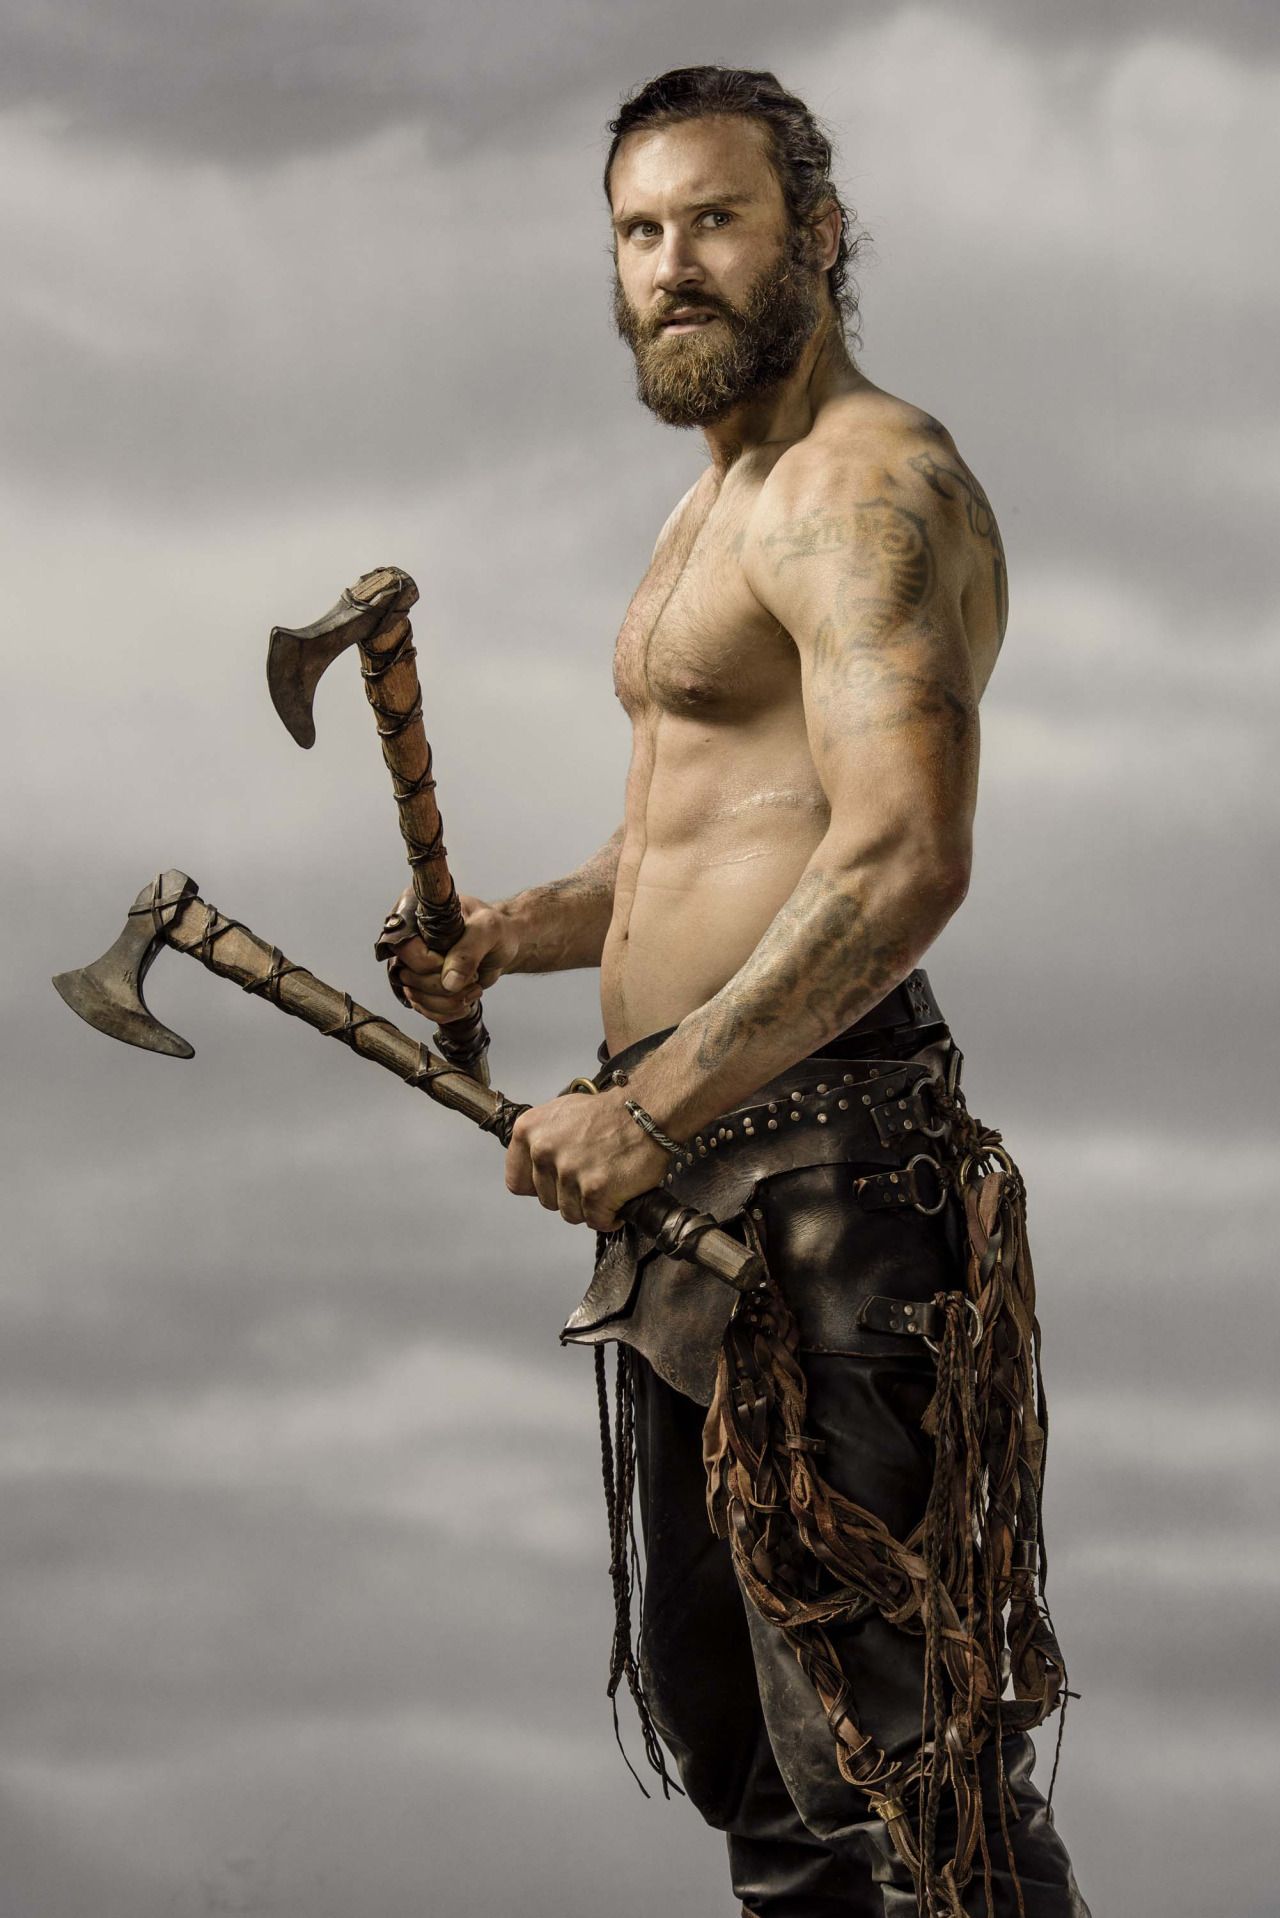 Clive Standen as Rollo for The History Channel's Vikings